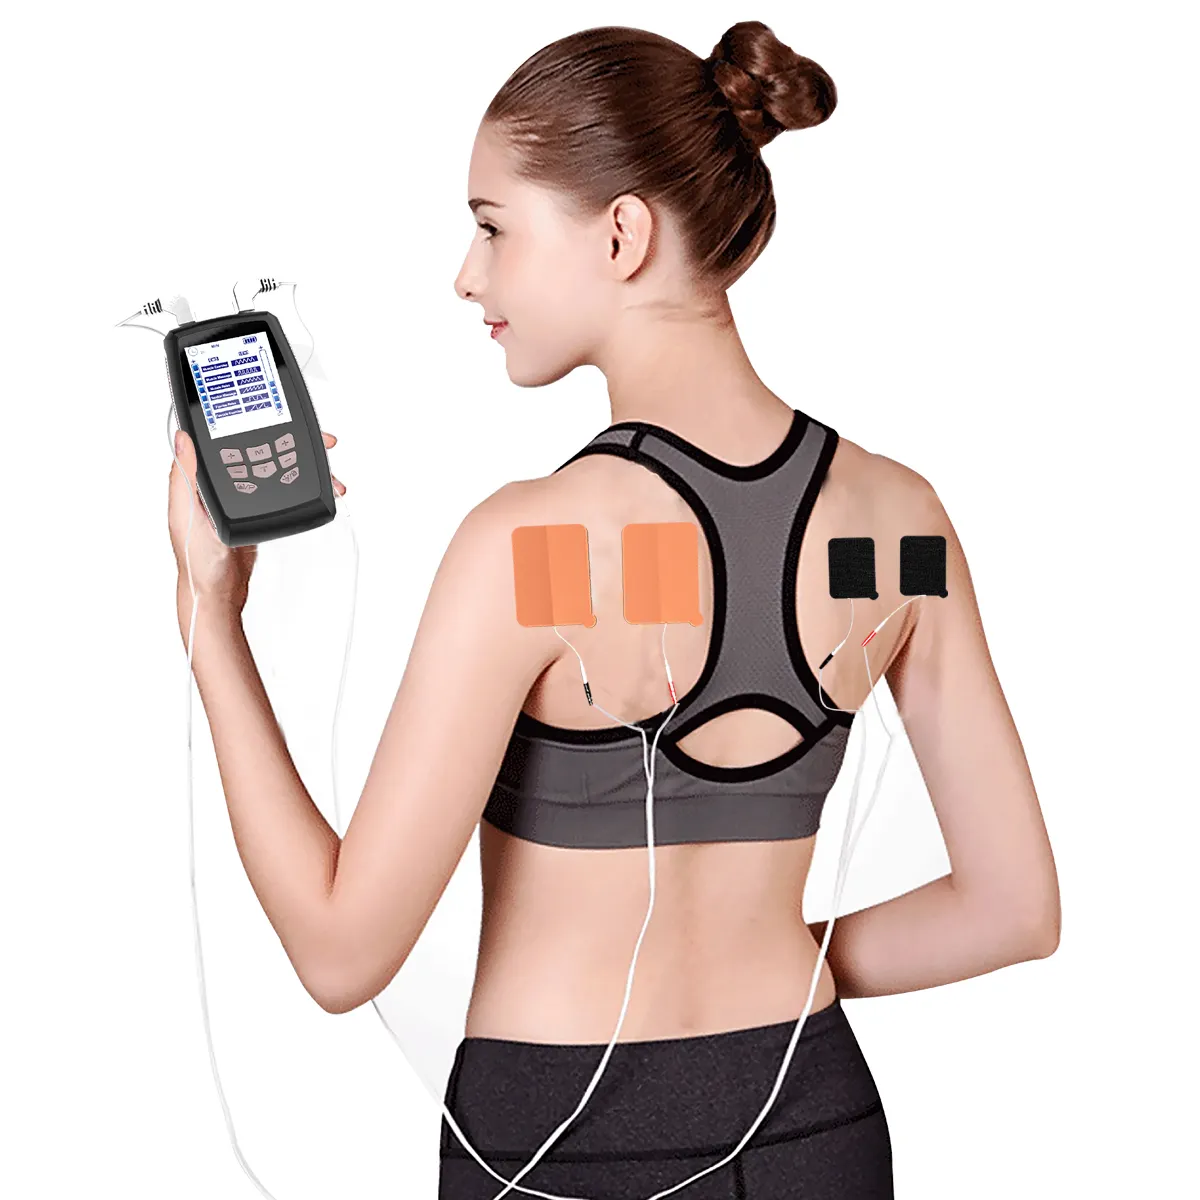 Ems Tens Unit Digital Therapy Machine for Pain Relief Therapy Electronic Pulse Massager Muscle Massager